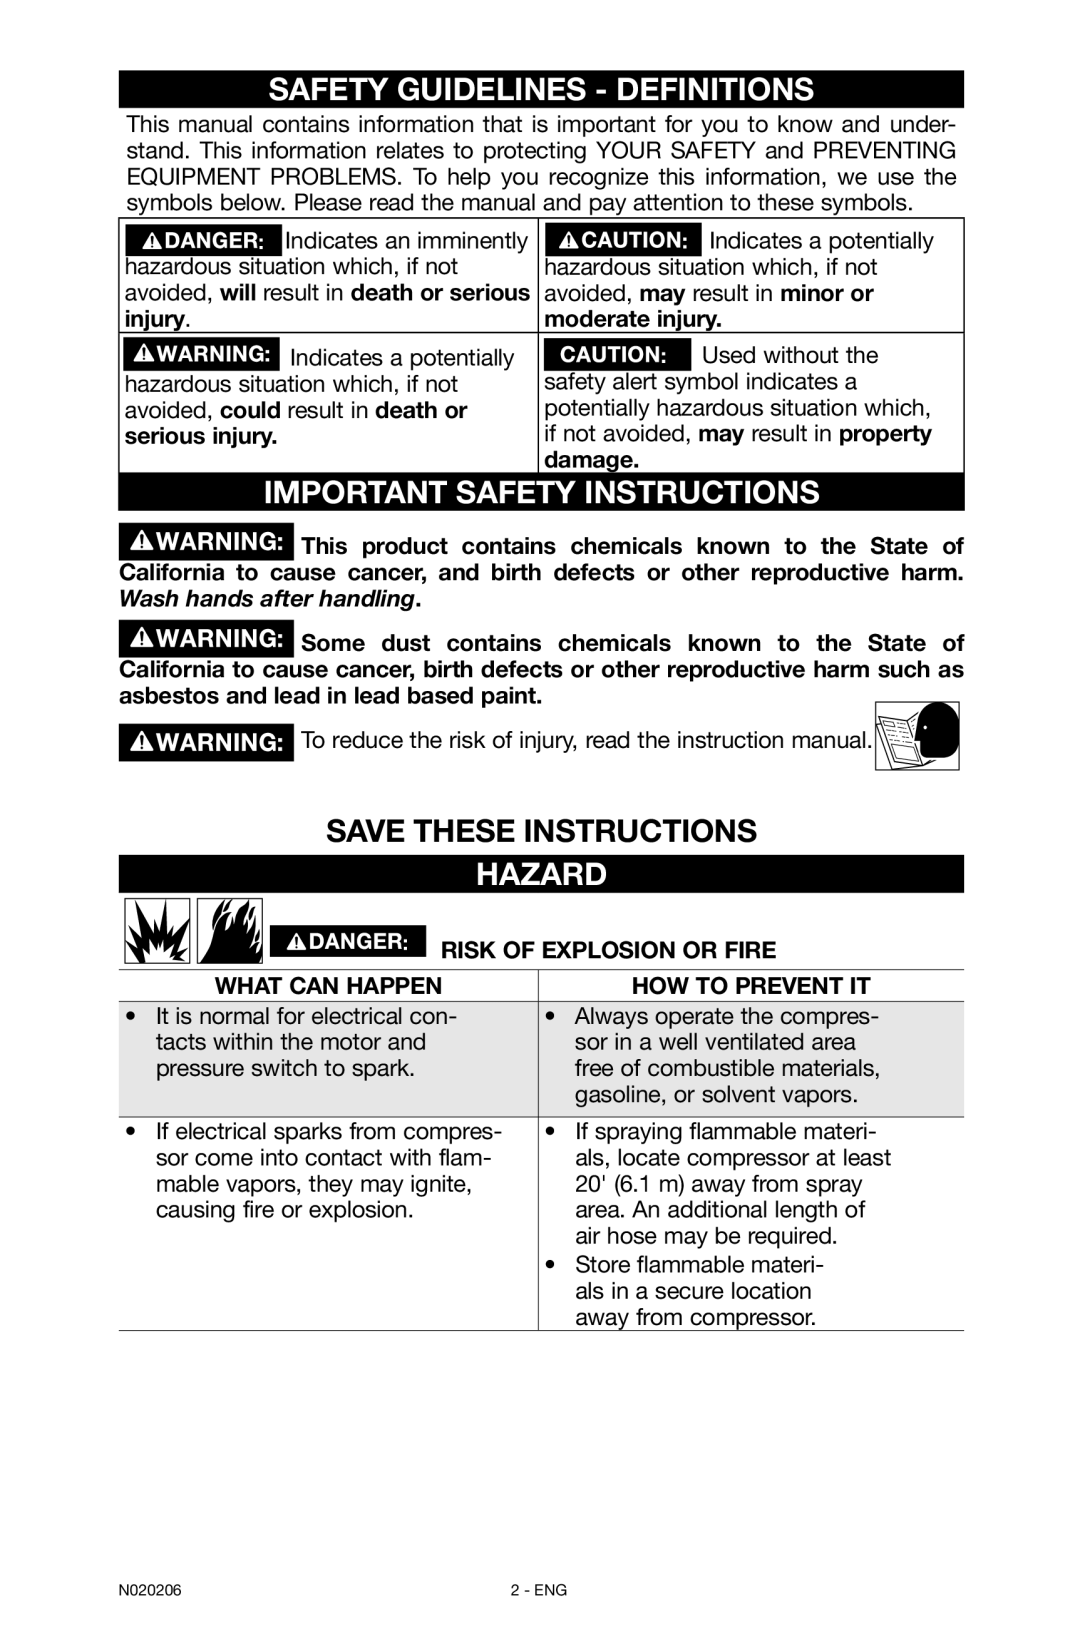 Porter-Cable N020206-NOV08-0 Safety Guidelines - Definitions, Important Safety Instructions, Save These Instructions 